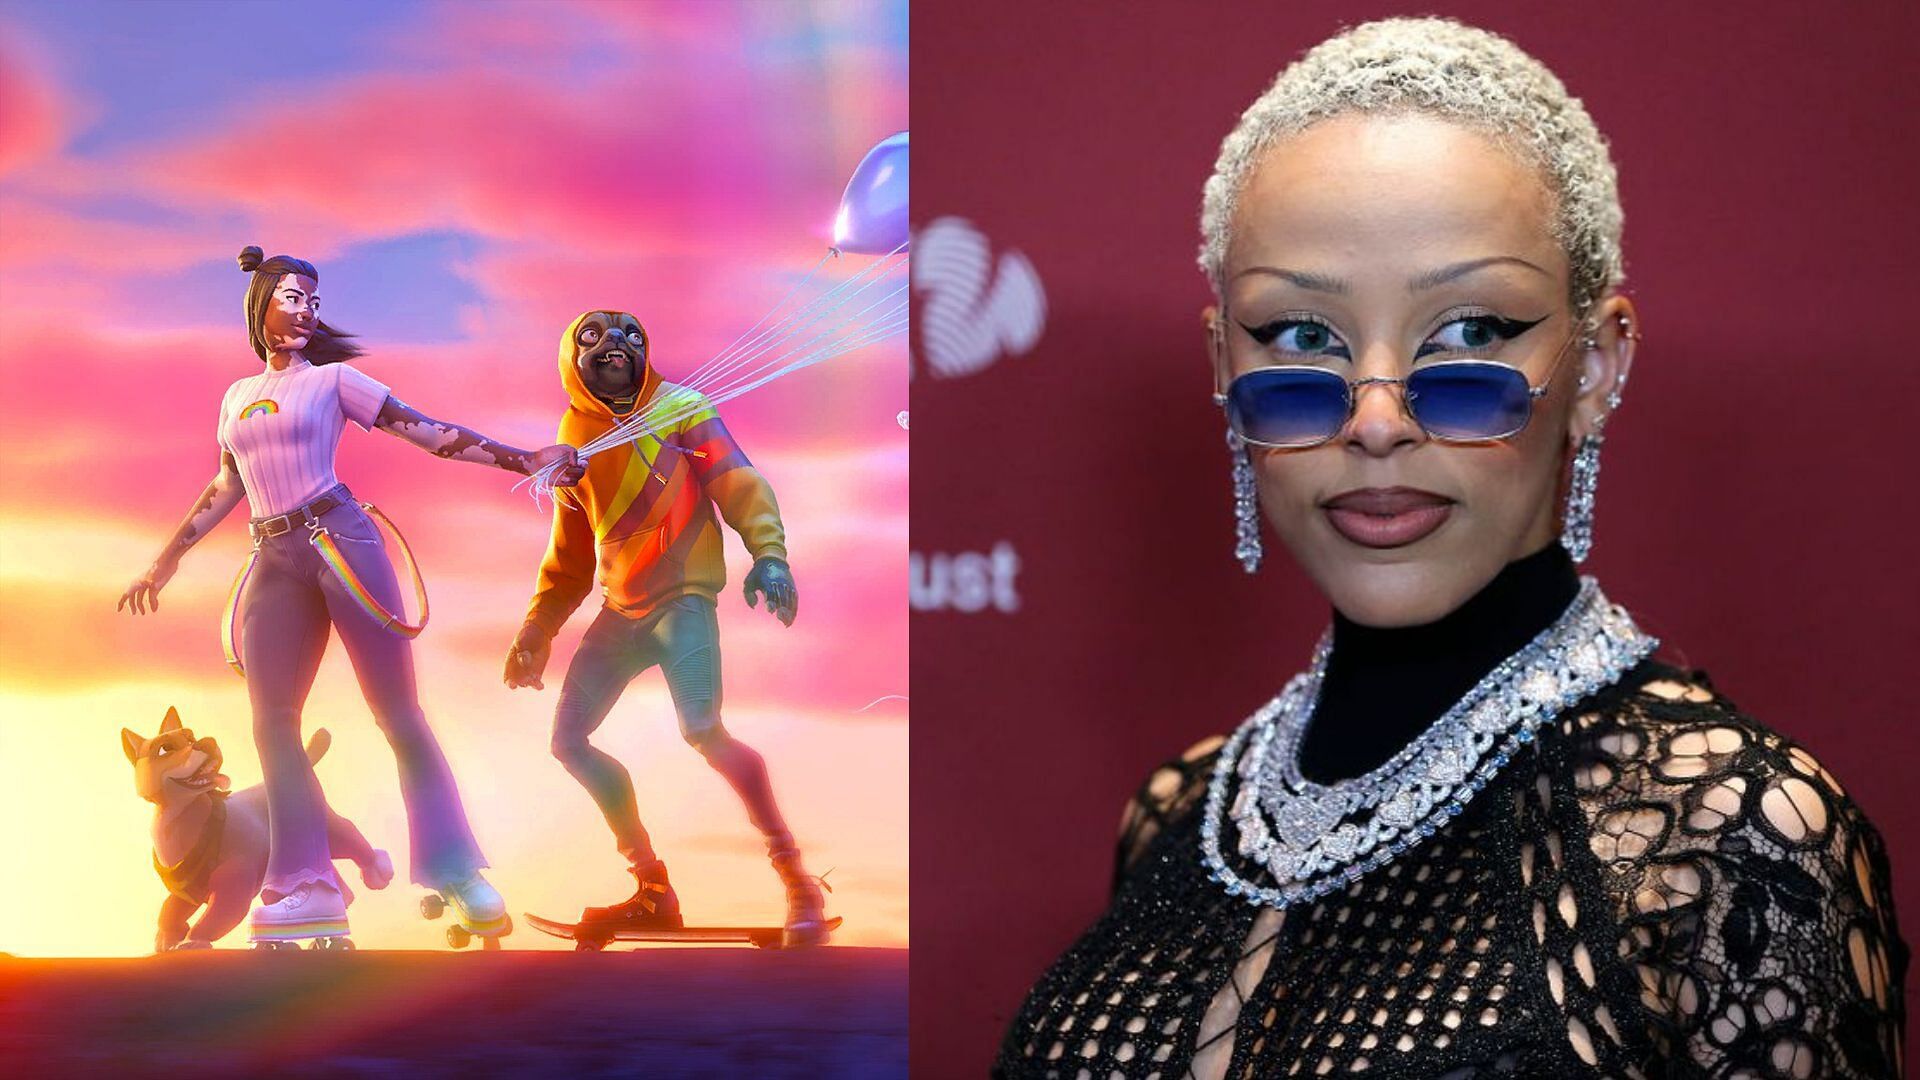 &ldquo;Don&rsquo;t care for the adult-baby aesthetic and rollerskates. F**kin sucks&rdquo;: Doja Cat belittles Fortnite concept artist DahjaCat&rsquo;s Bundle, community left in disbelief 